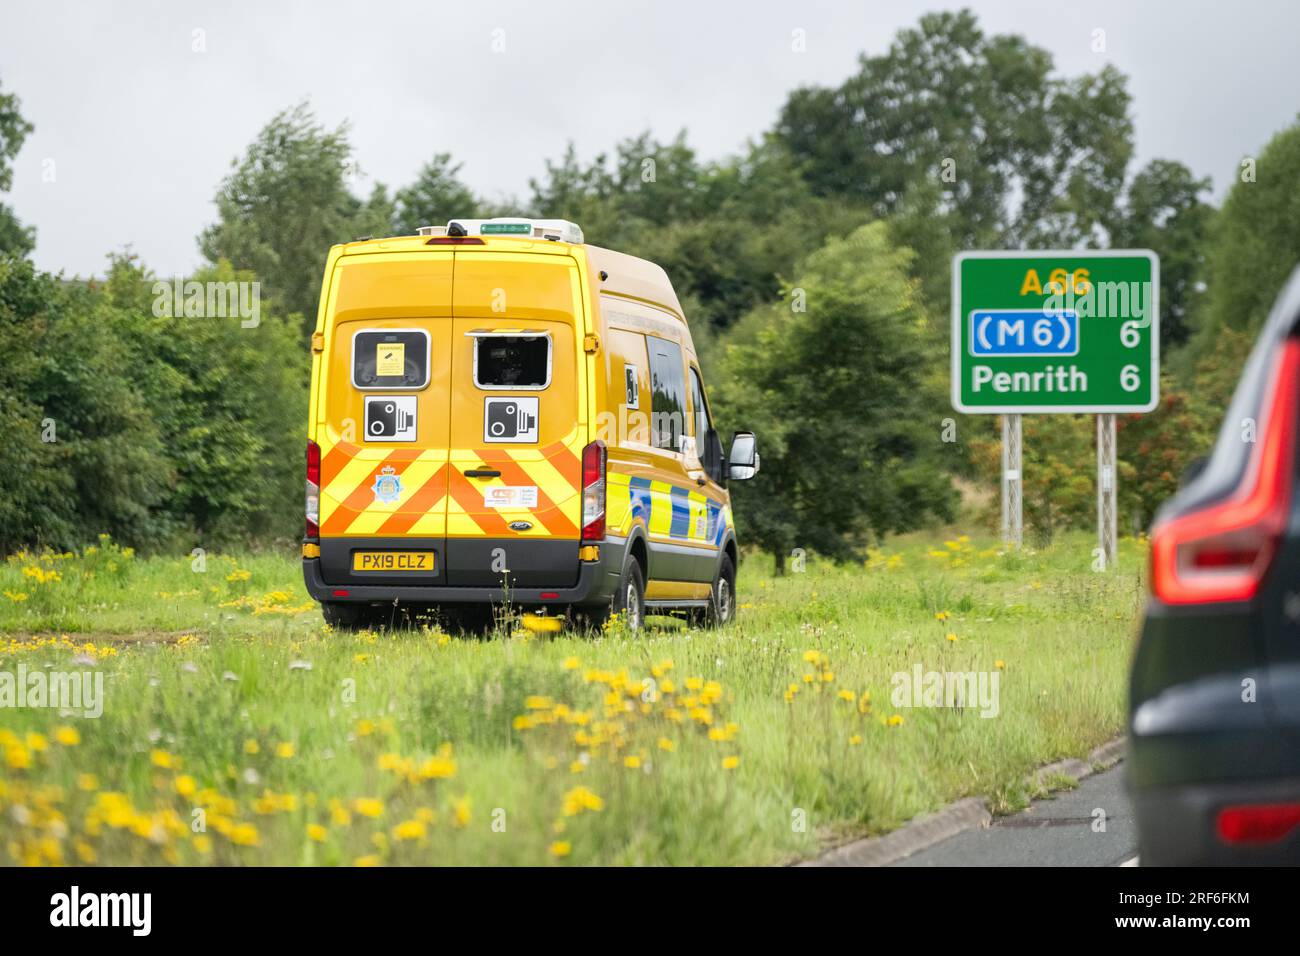 Mobile speed camera in van parked next to A66 road, England, UK Stock Photo